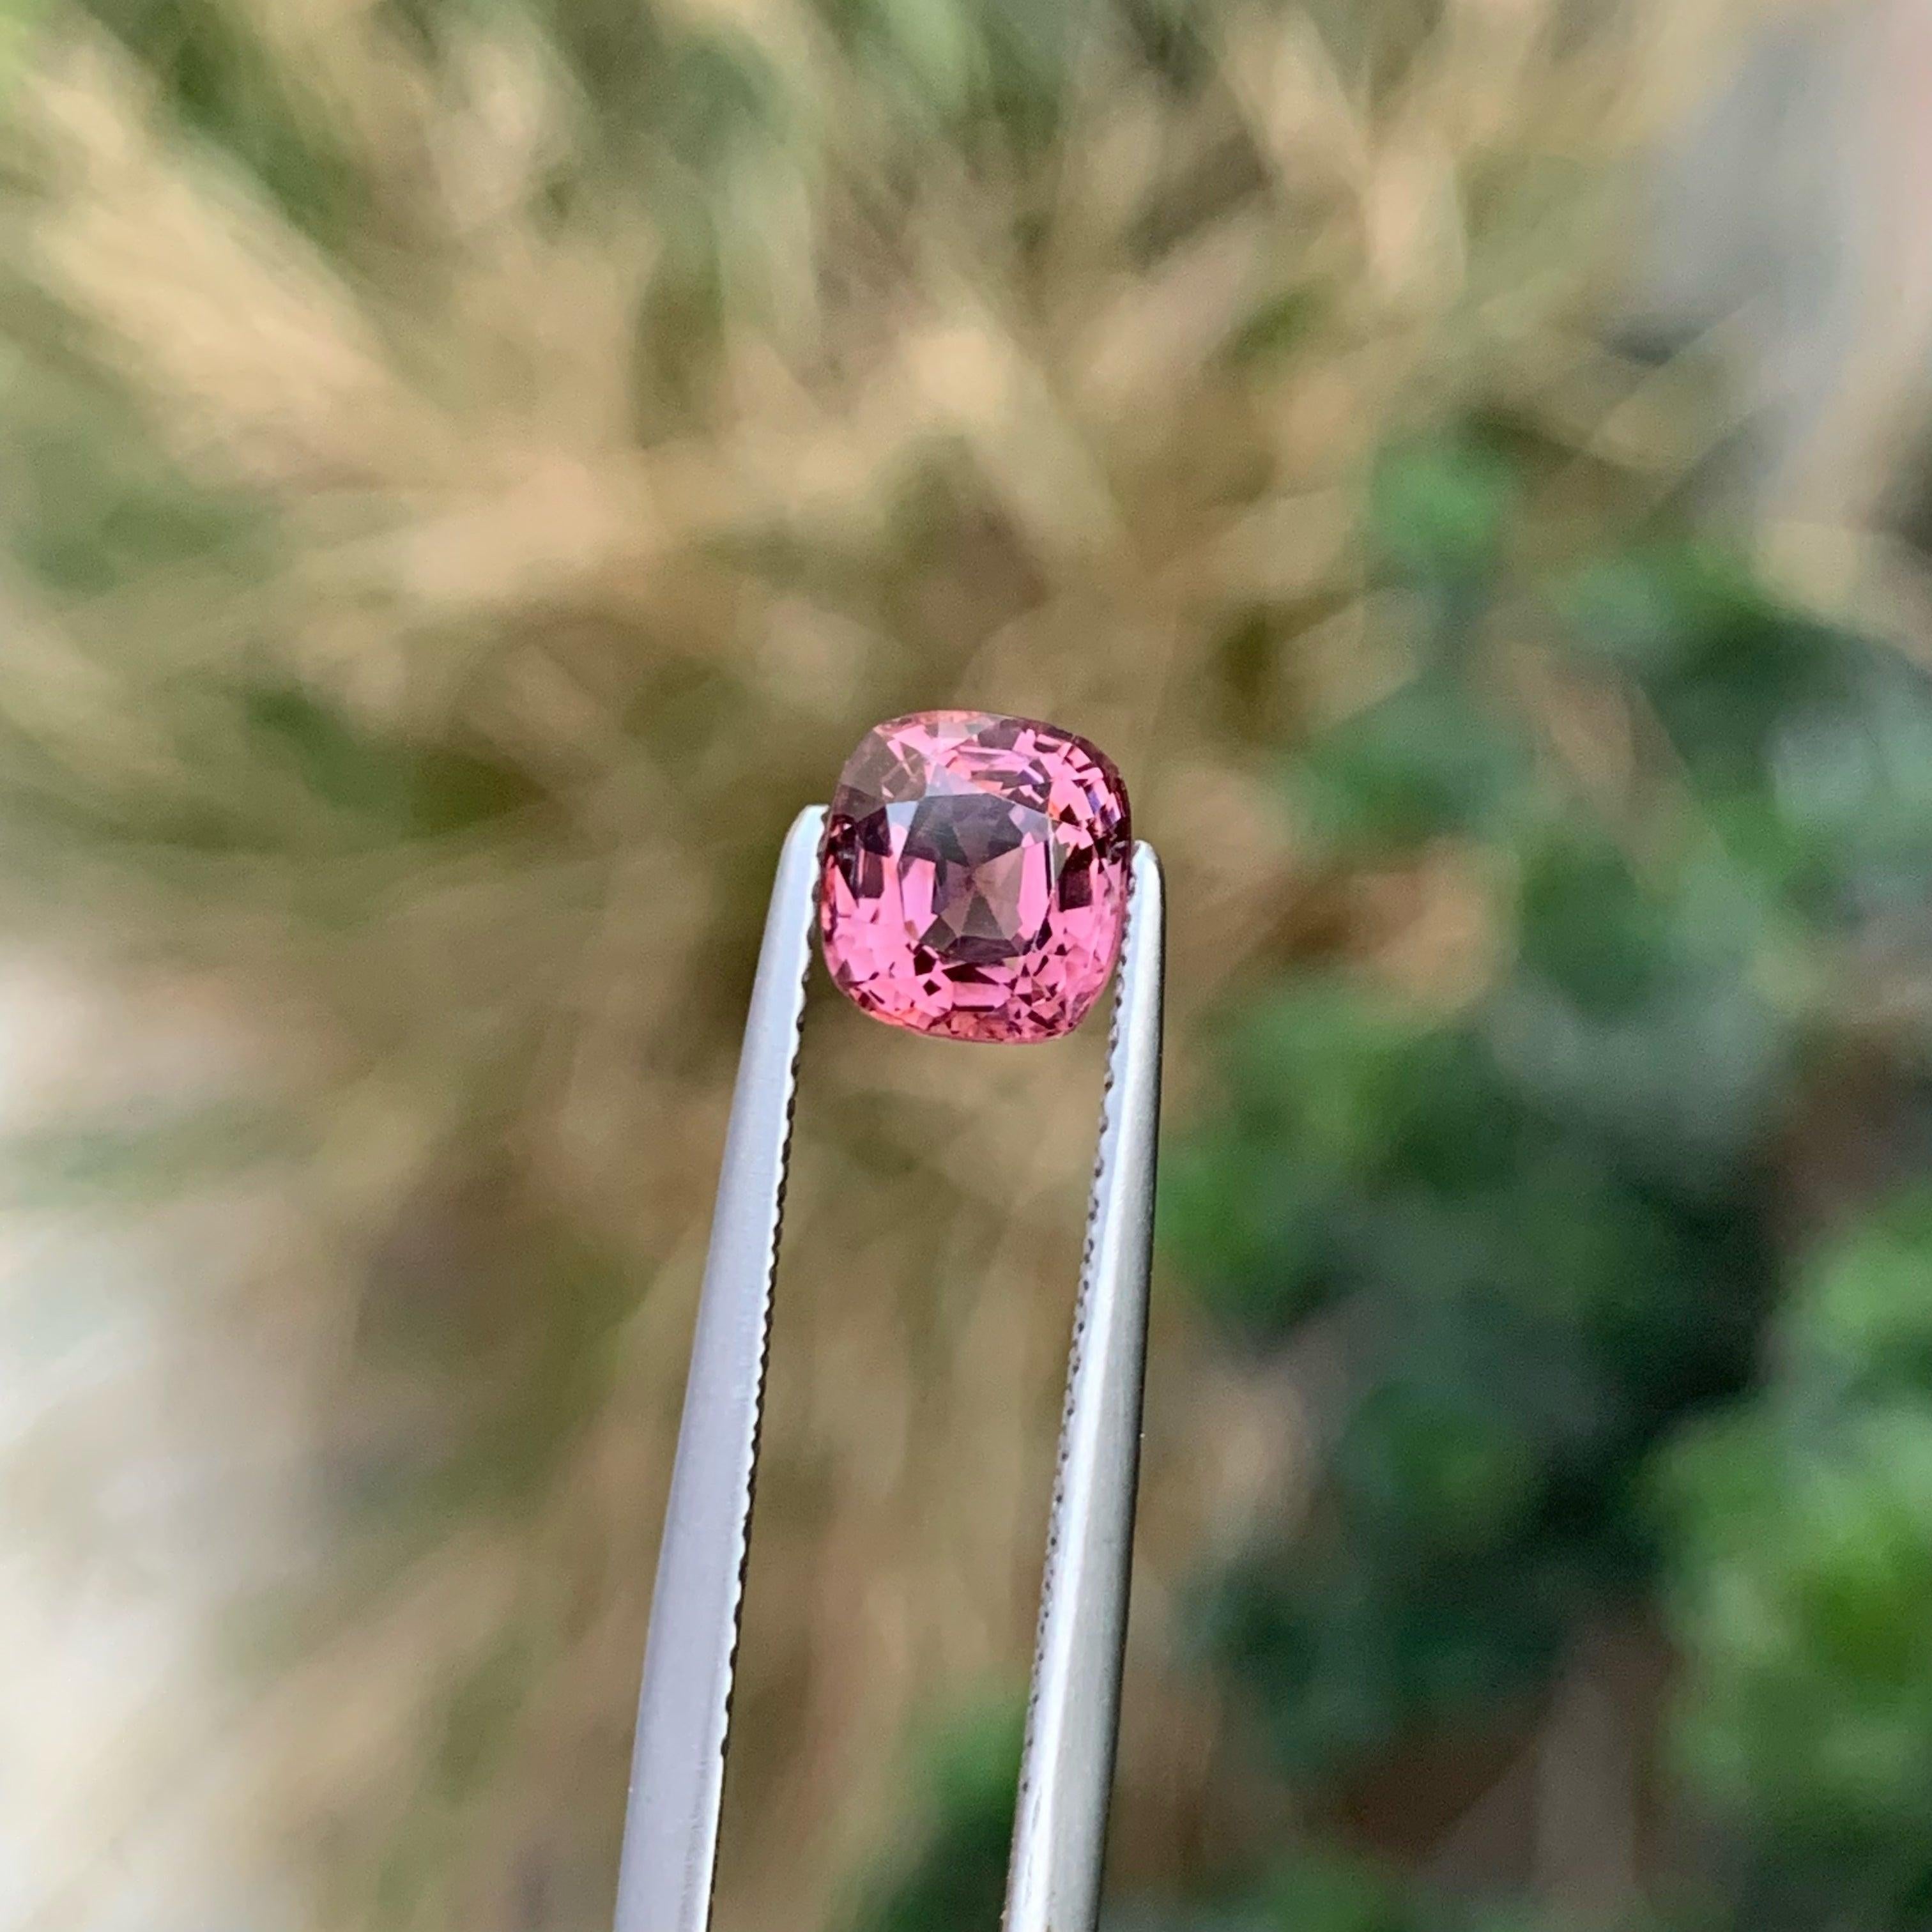 Baby Pink Natural Spinel Gemstone, Available For Sale At Wholesale Price Natural High Quality 1.40 carats Eye Clean Clarity Loose Spinel from Burma.

Product Information:
GEMSTONE TYPE:	Baby Pink Natural Spinel Gemstone
WEIGHT: 1.40